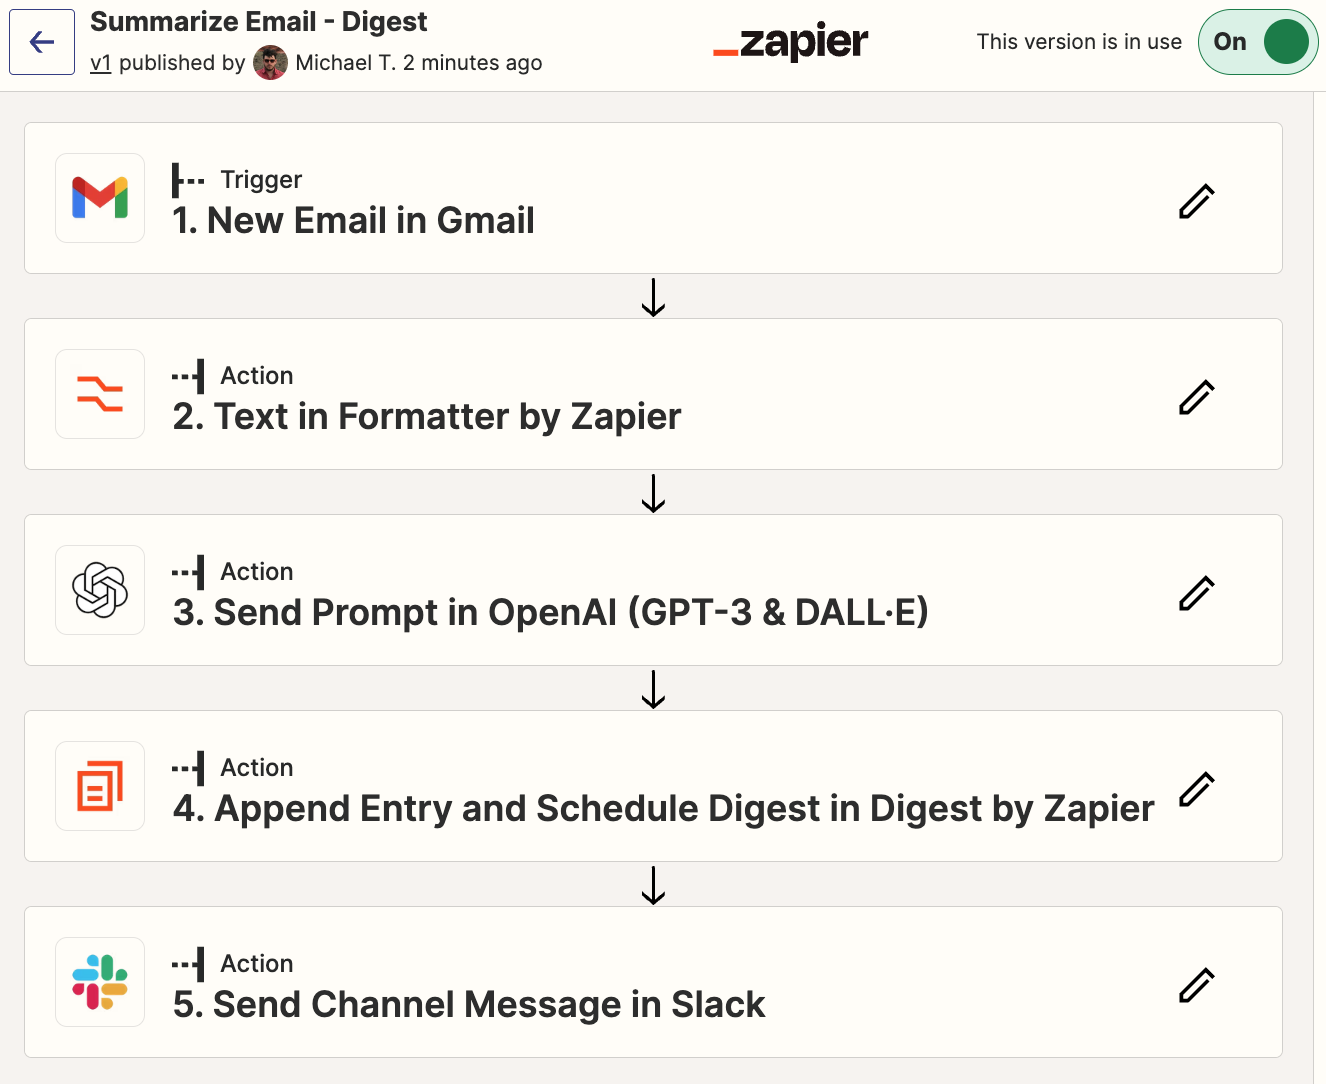 A 5-step Zap in the Zap editor.